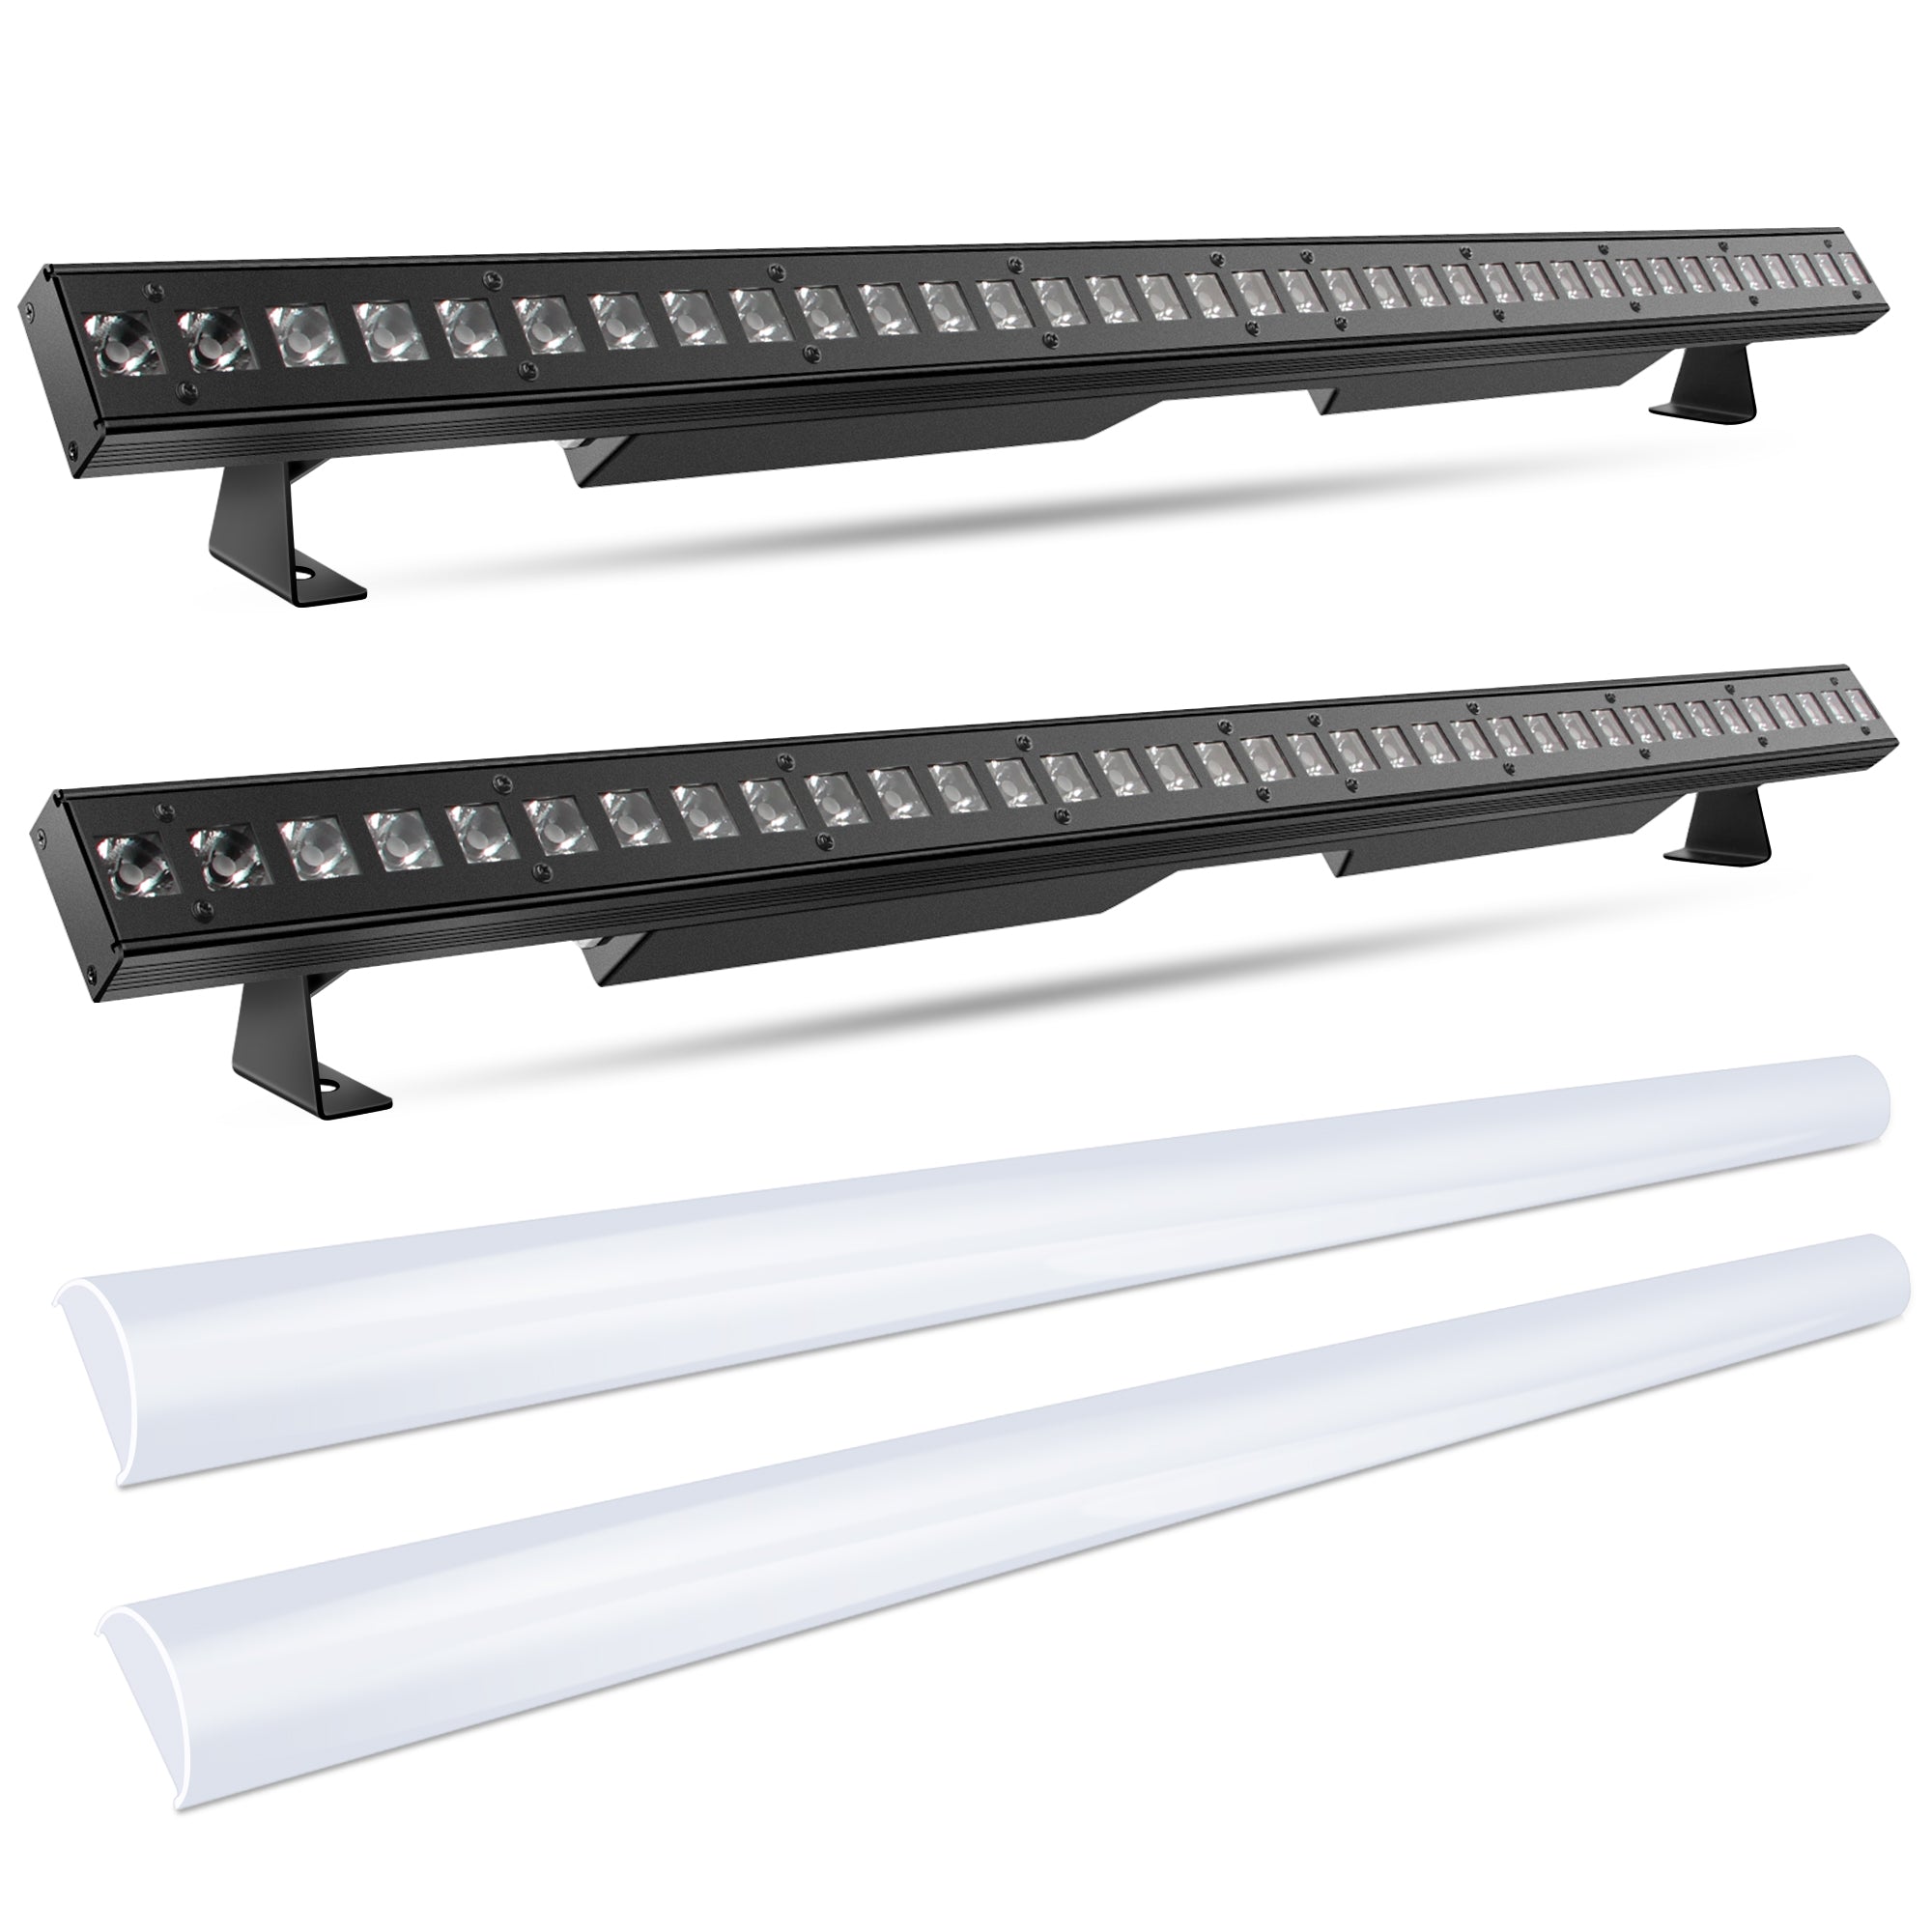 1-meter LED Stage Wash Light Bar - RGBW 4in1 - 120W